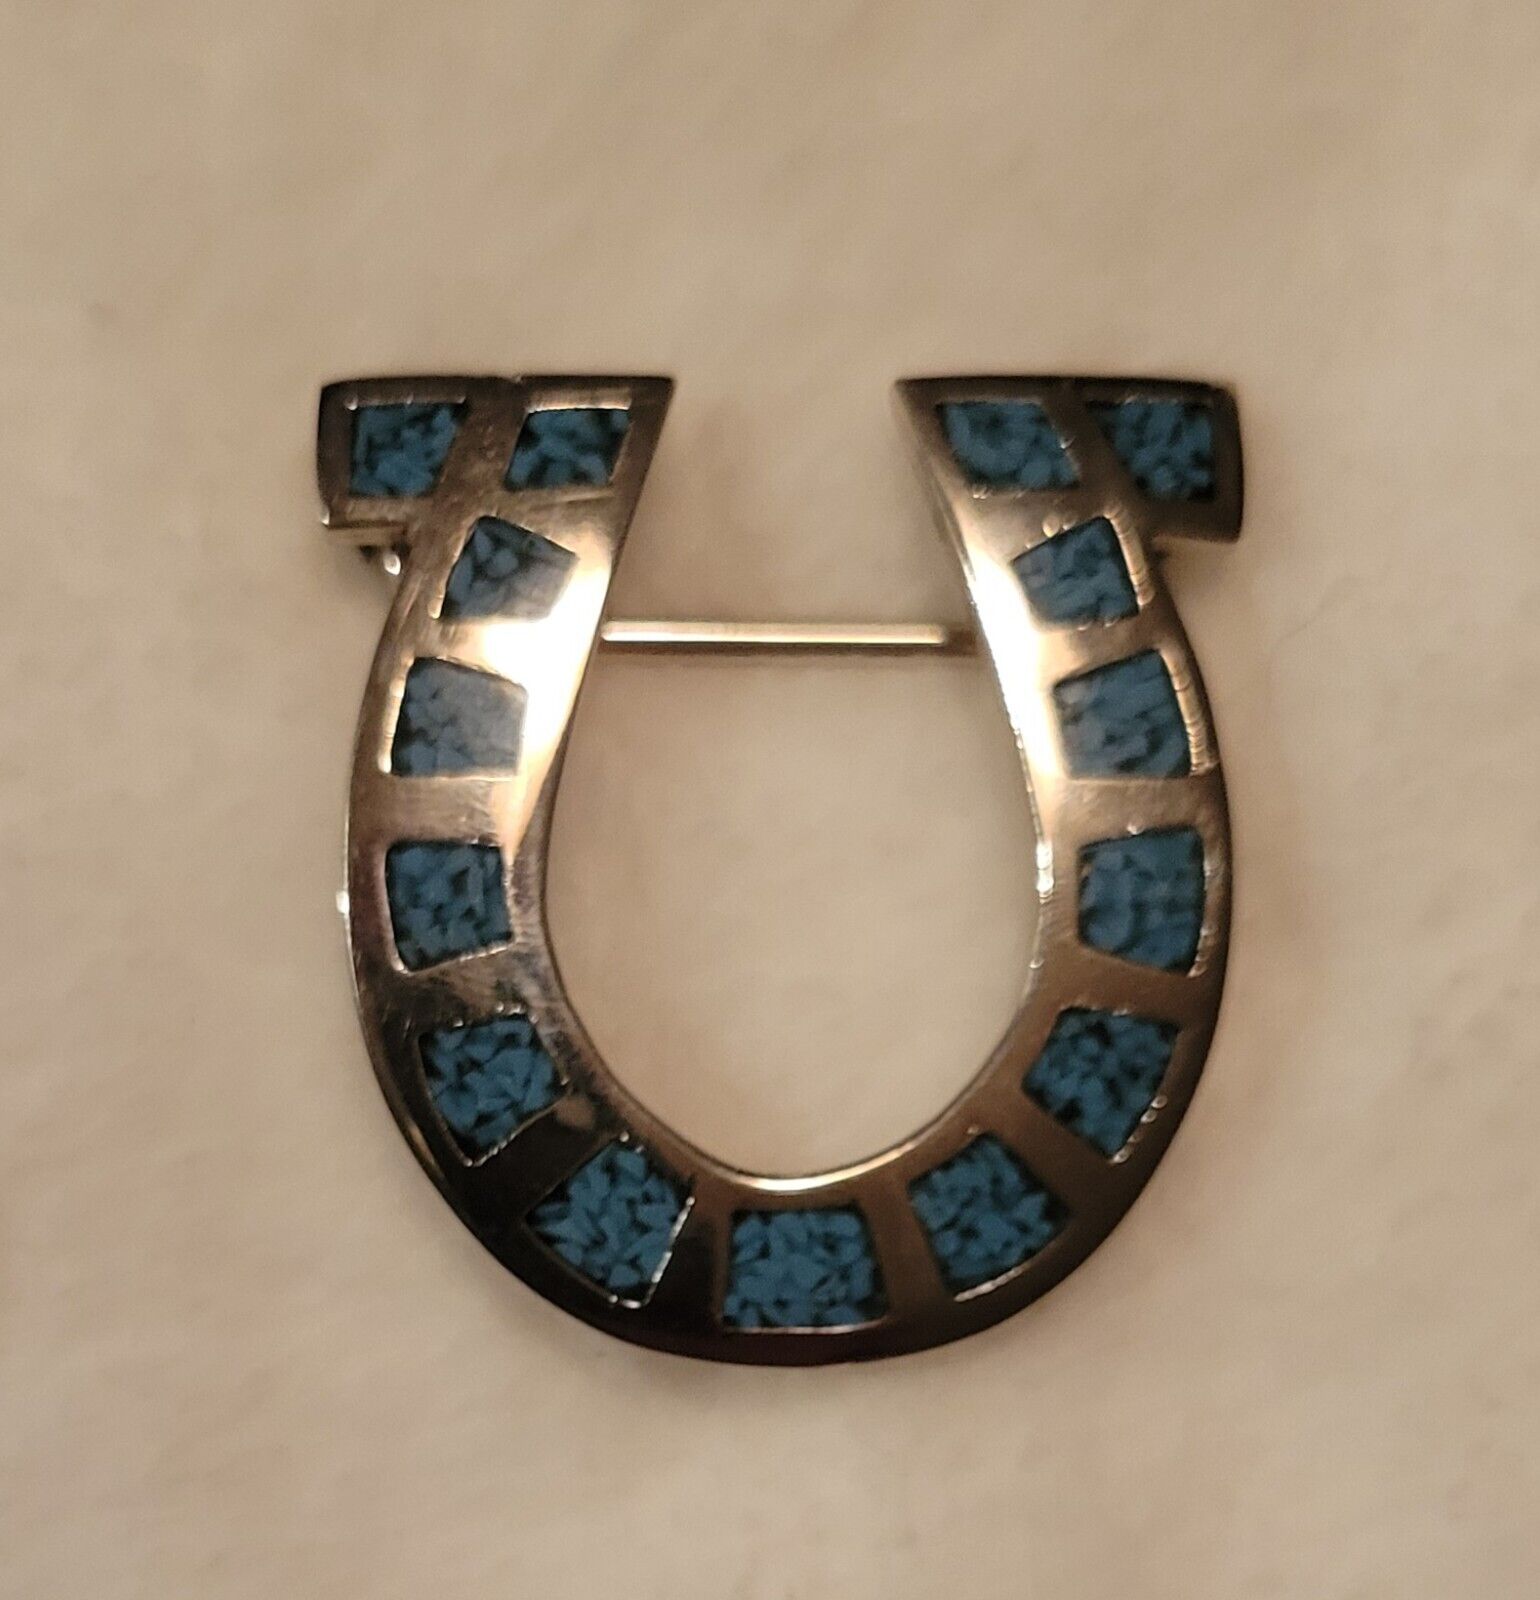 Vintage Horseshoe Belt Buckle with Turquoise (or turquoise like filled) womens